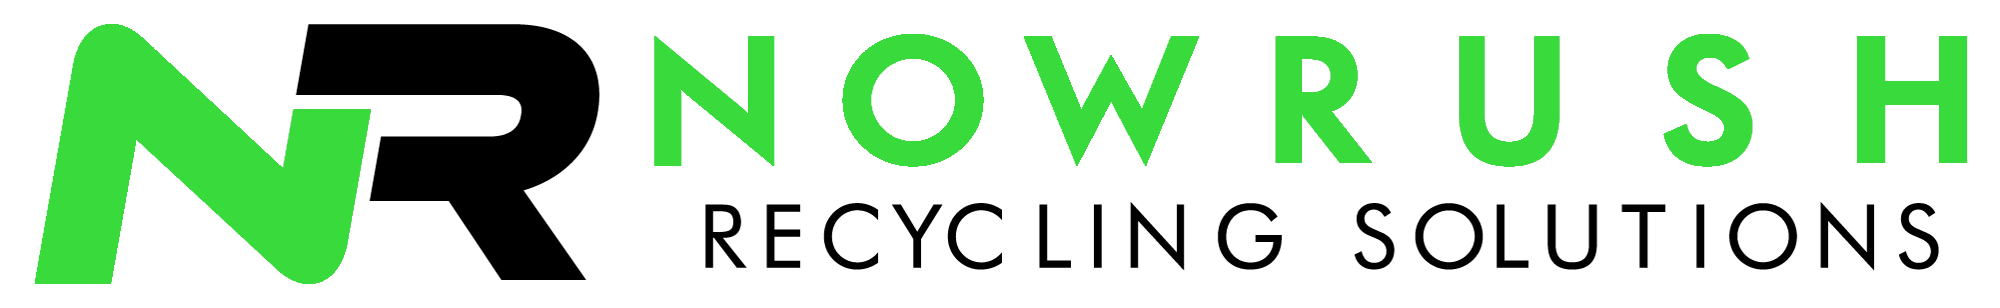 NowRush Recycling Solutions Logo transparent